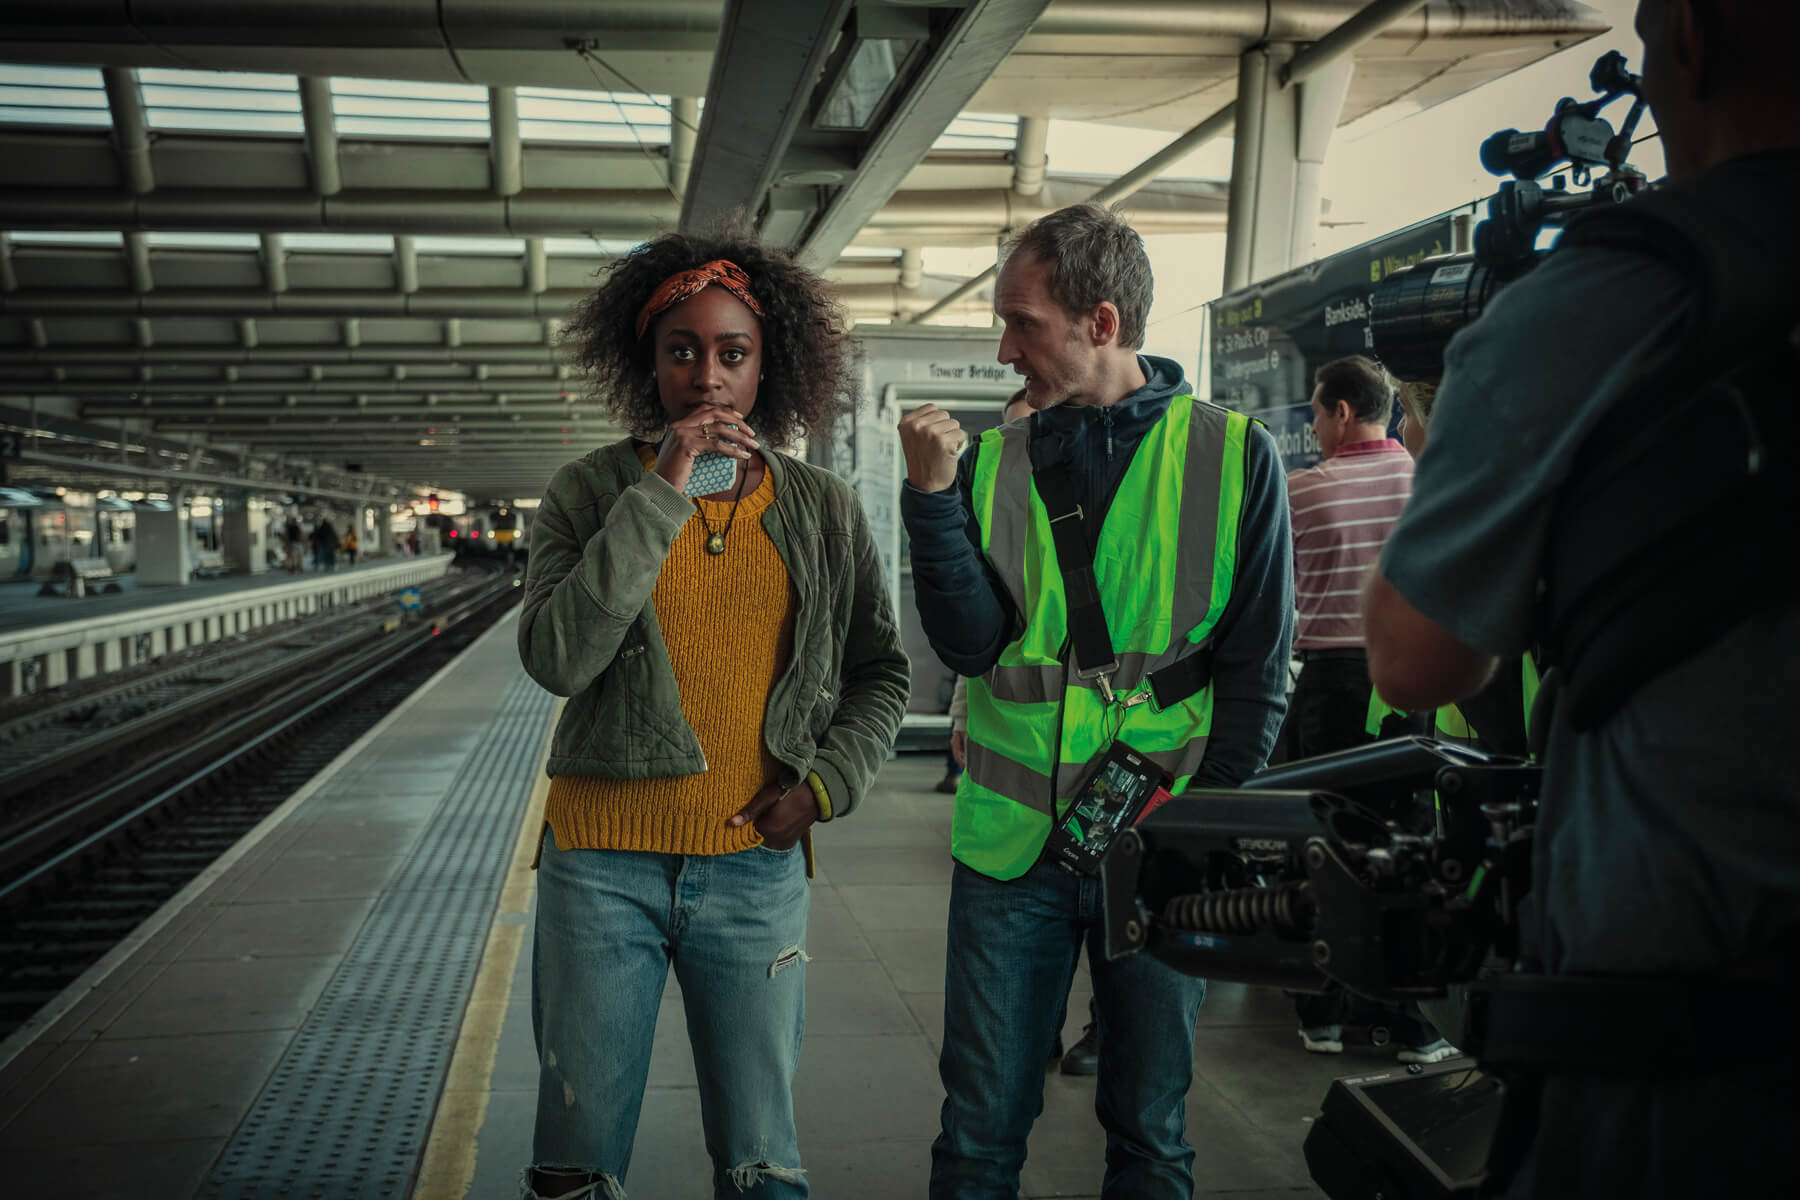 Simona Brown stands with crew, preparing for a train station scene in Behind Her Eyes